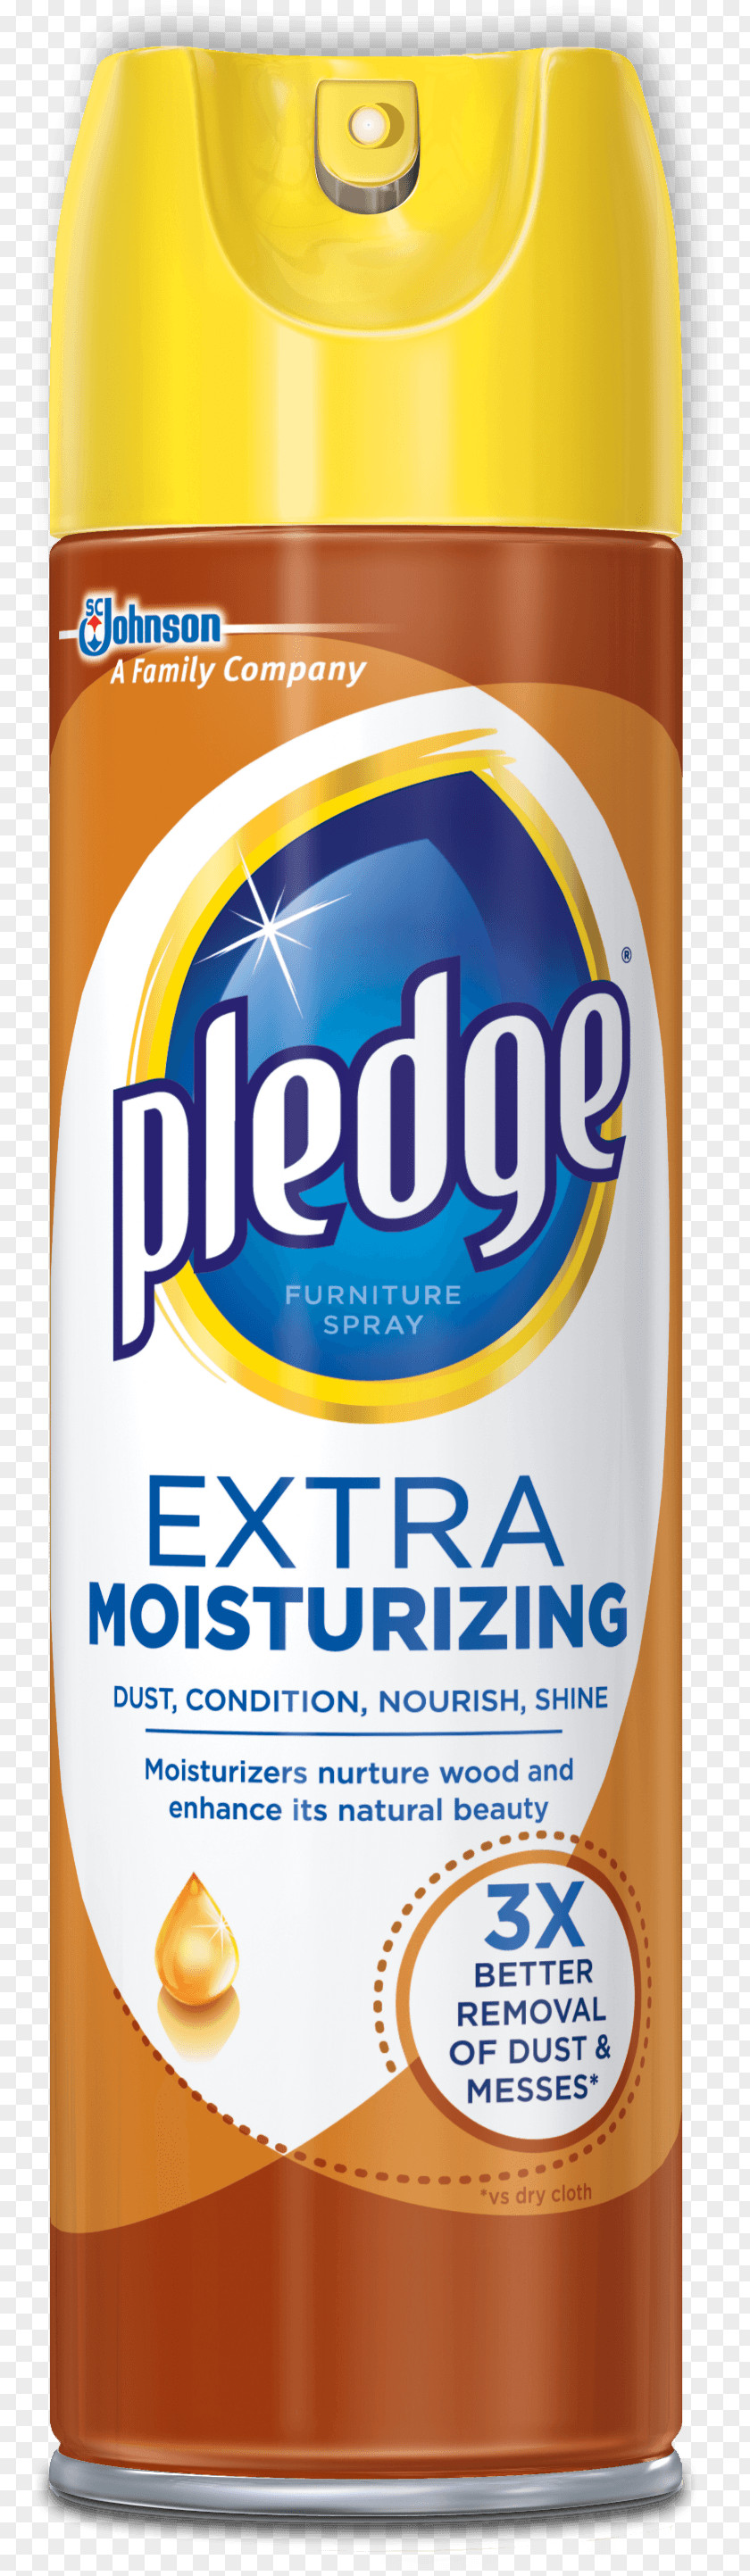 Cleaning And Dust Pledge Aerosol Spray Furniture Wood Cleaner PNG